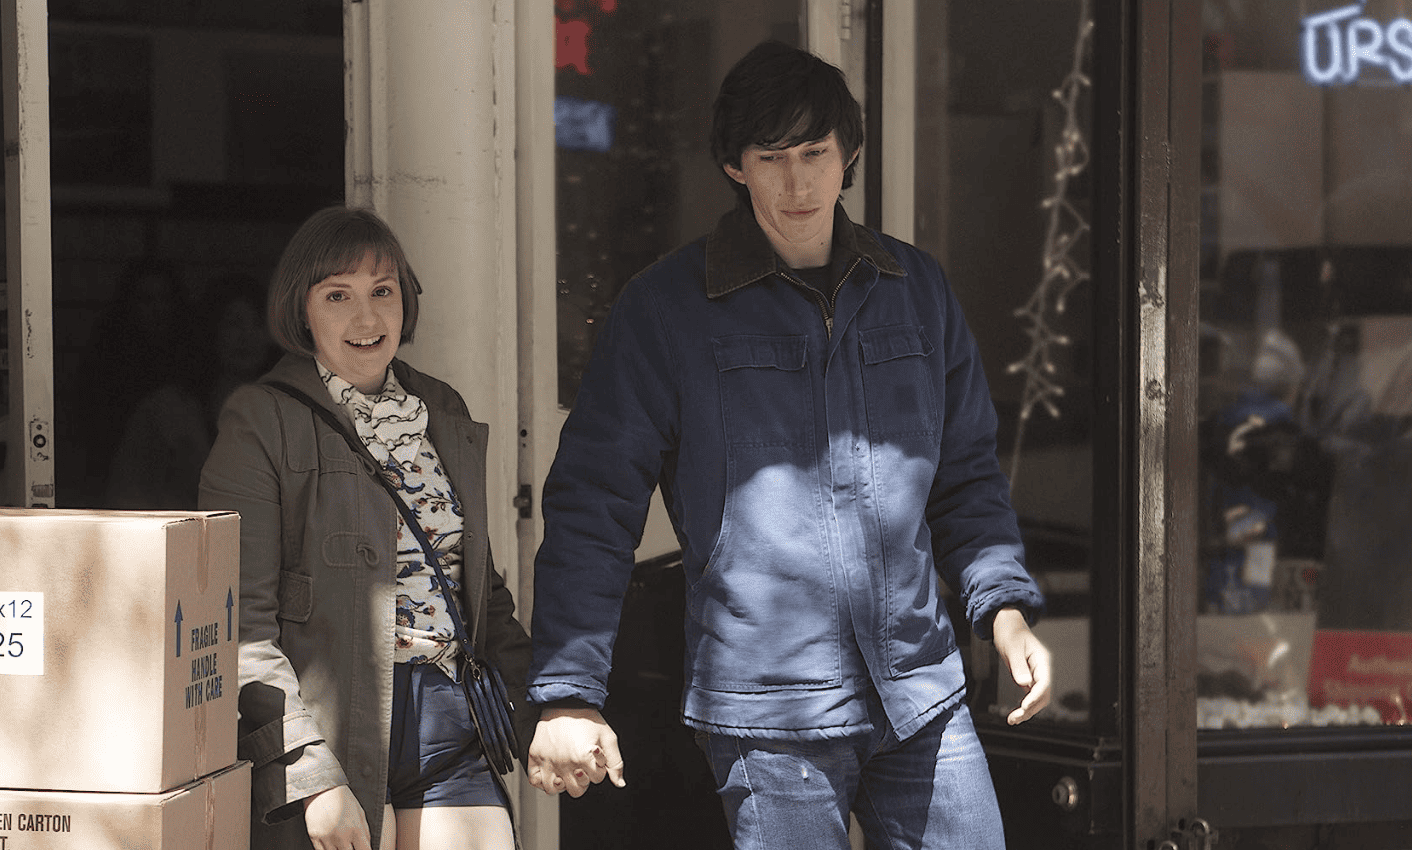 Adam Driver holding hands with Lena Dunham as they step out of a store in this image from Apatow Productions